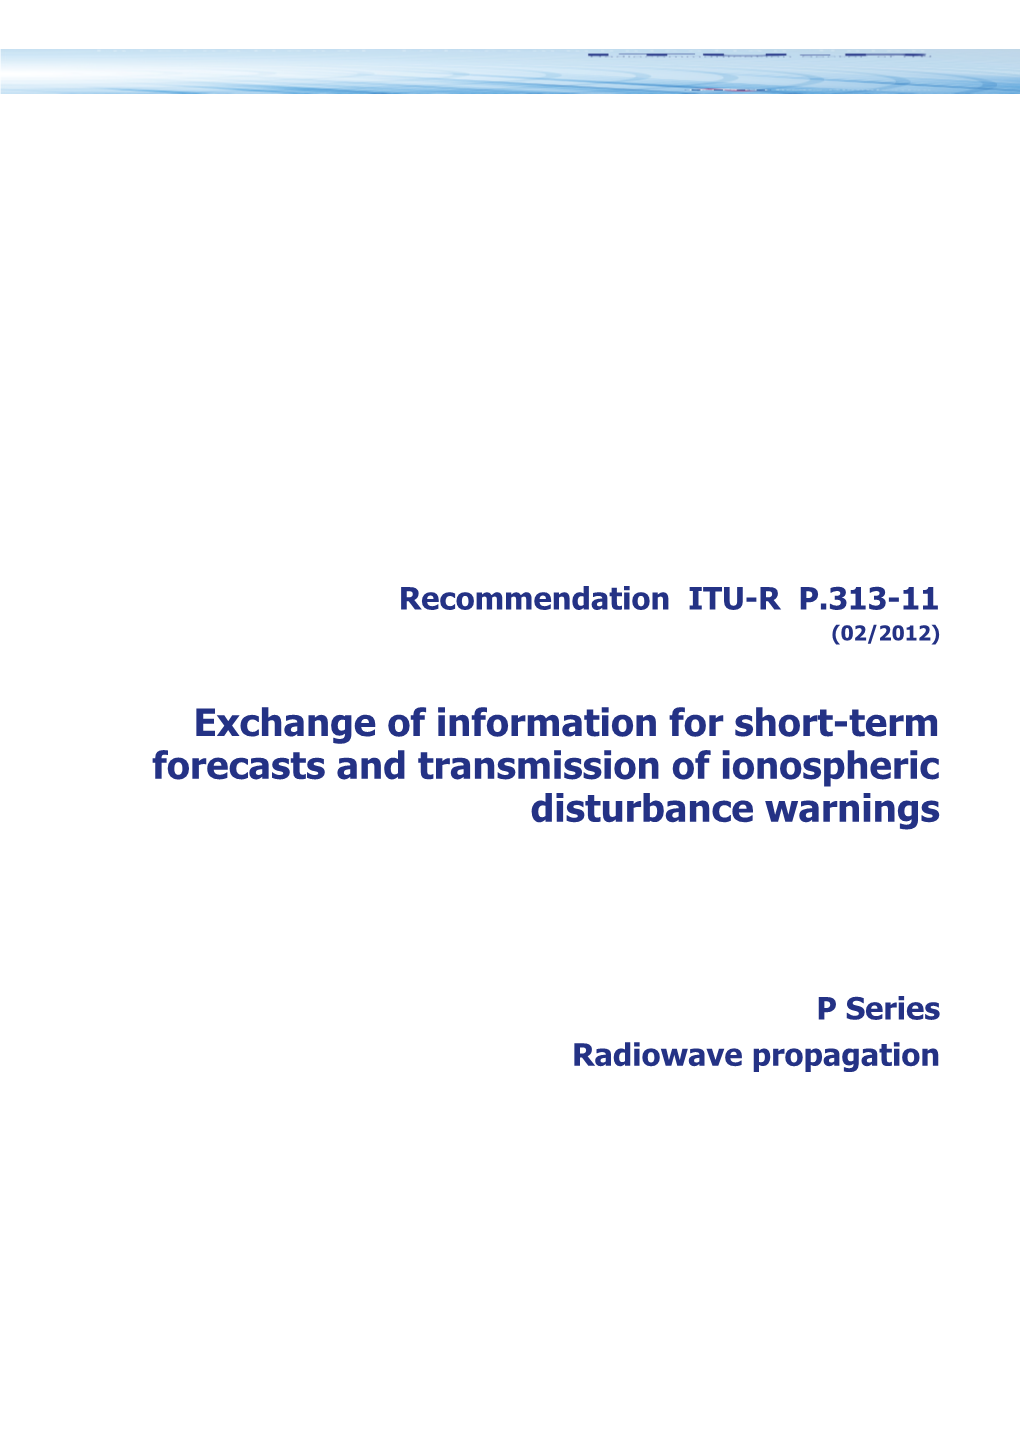 RECOMMENDATION ITU-R P.313-11 - Exchange of Information for Short-Term Forecasts And